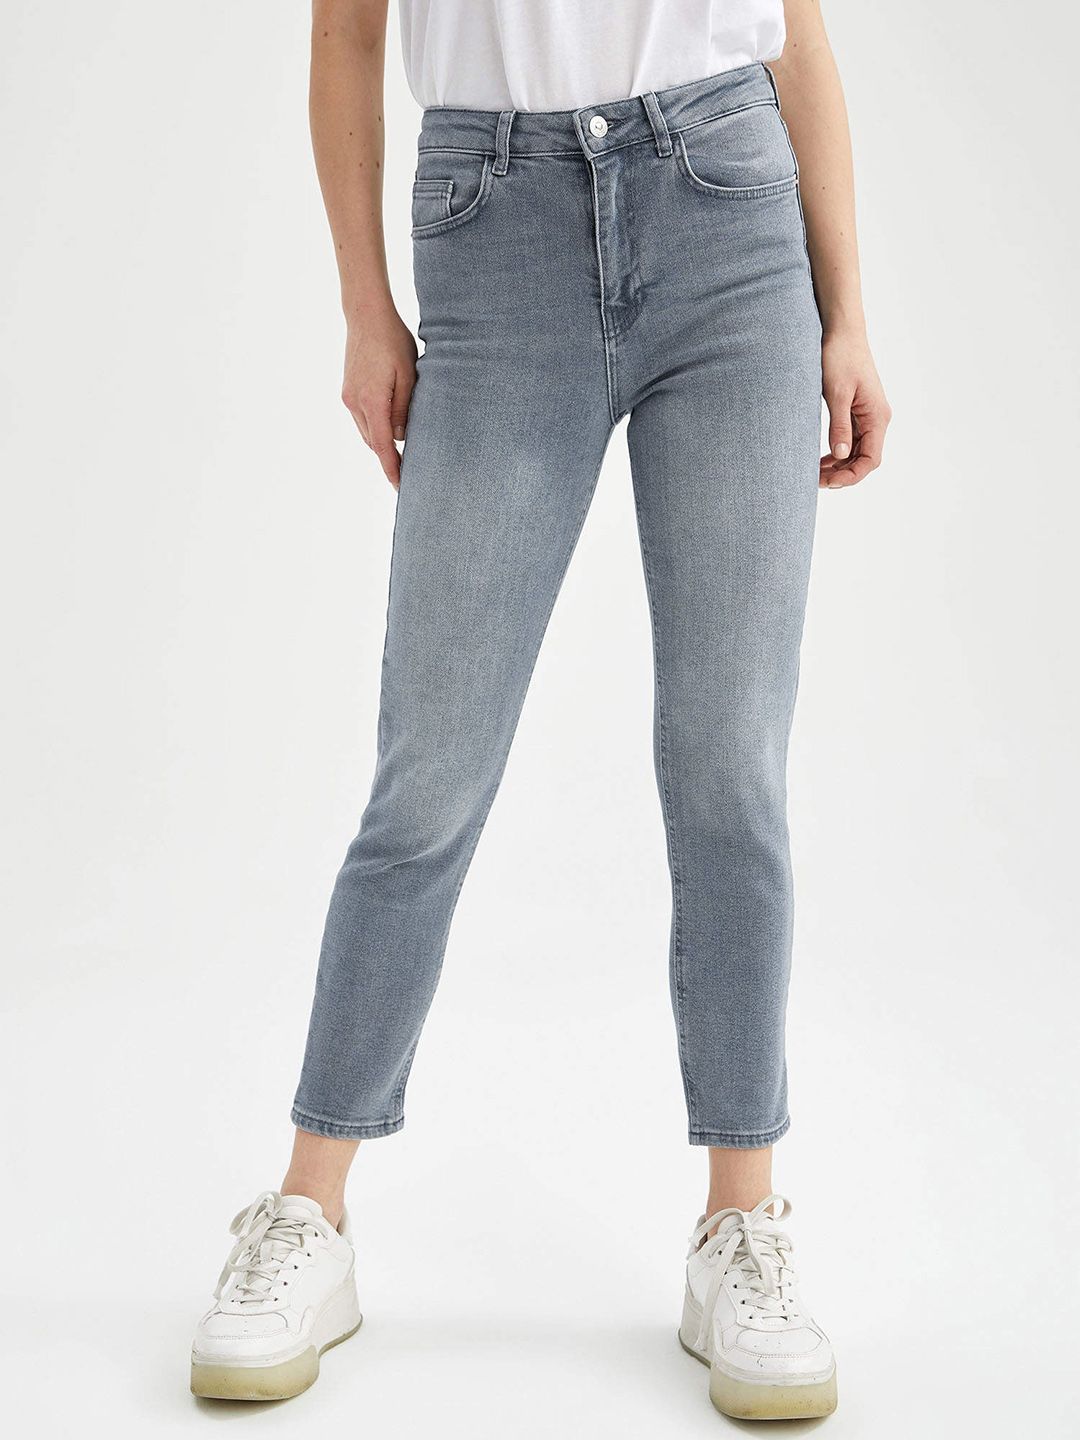 DeFacto Women Grey Light Fade Stretchable Jeans Price in India